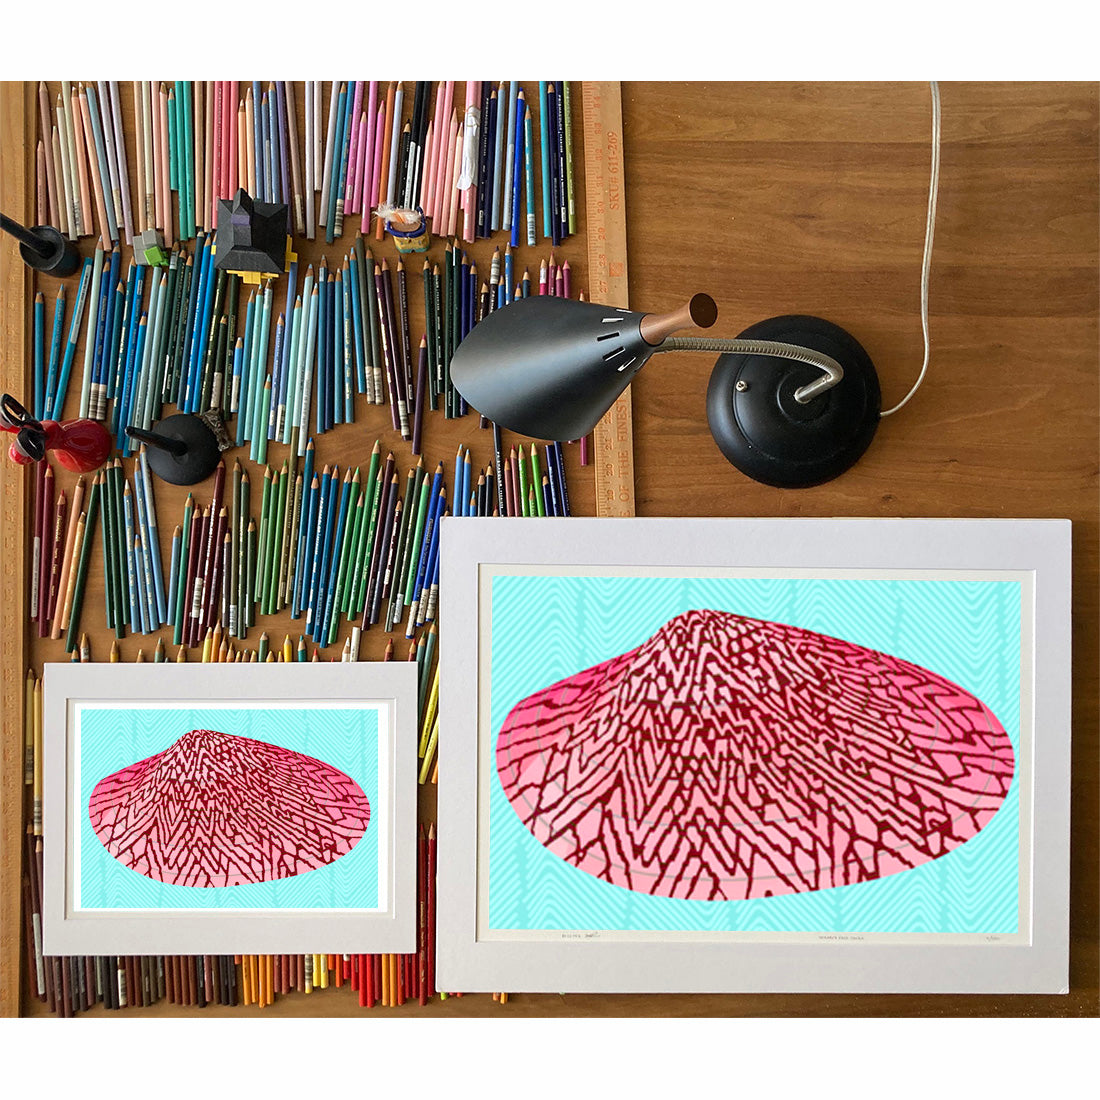 Clam Shell. Drawings of sea life by Oahu visual artist Judd Boloker.  Made in Hawaii. Fine Art from Hawaii. Art Shell Print